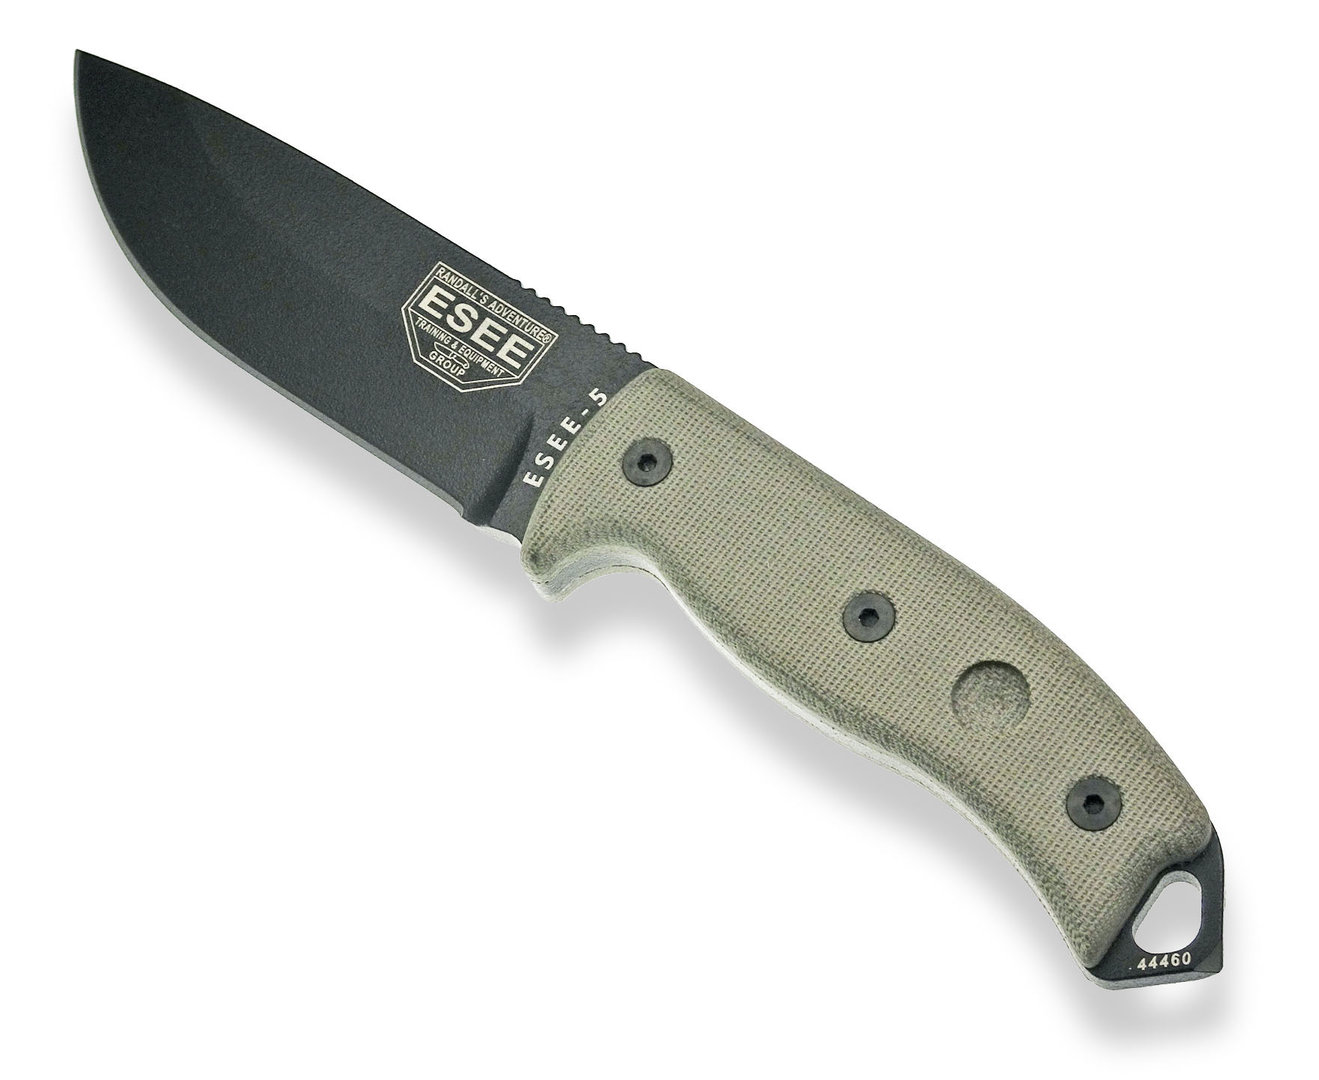 ESEE-5 black without sheath